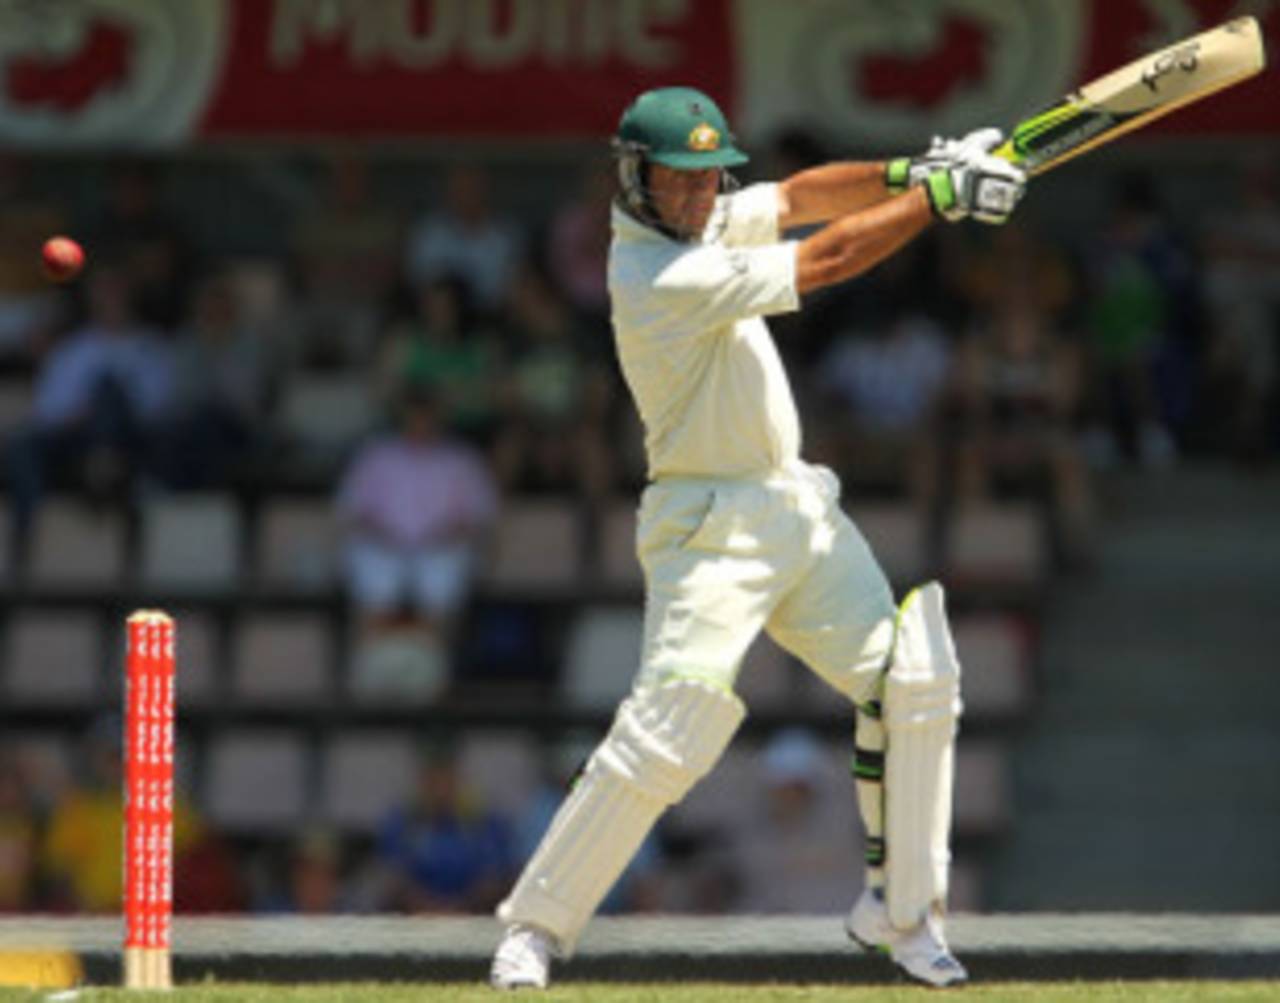 Ricky Ponting cuts on the way to a double-century, 3rd Test, Australia v Pakistan, 2nd day, Hobart, January 15, 2010